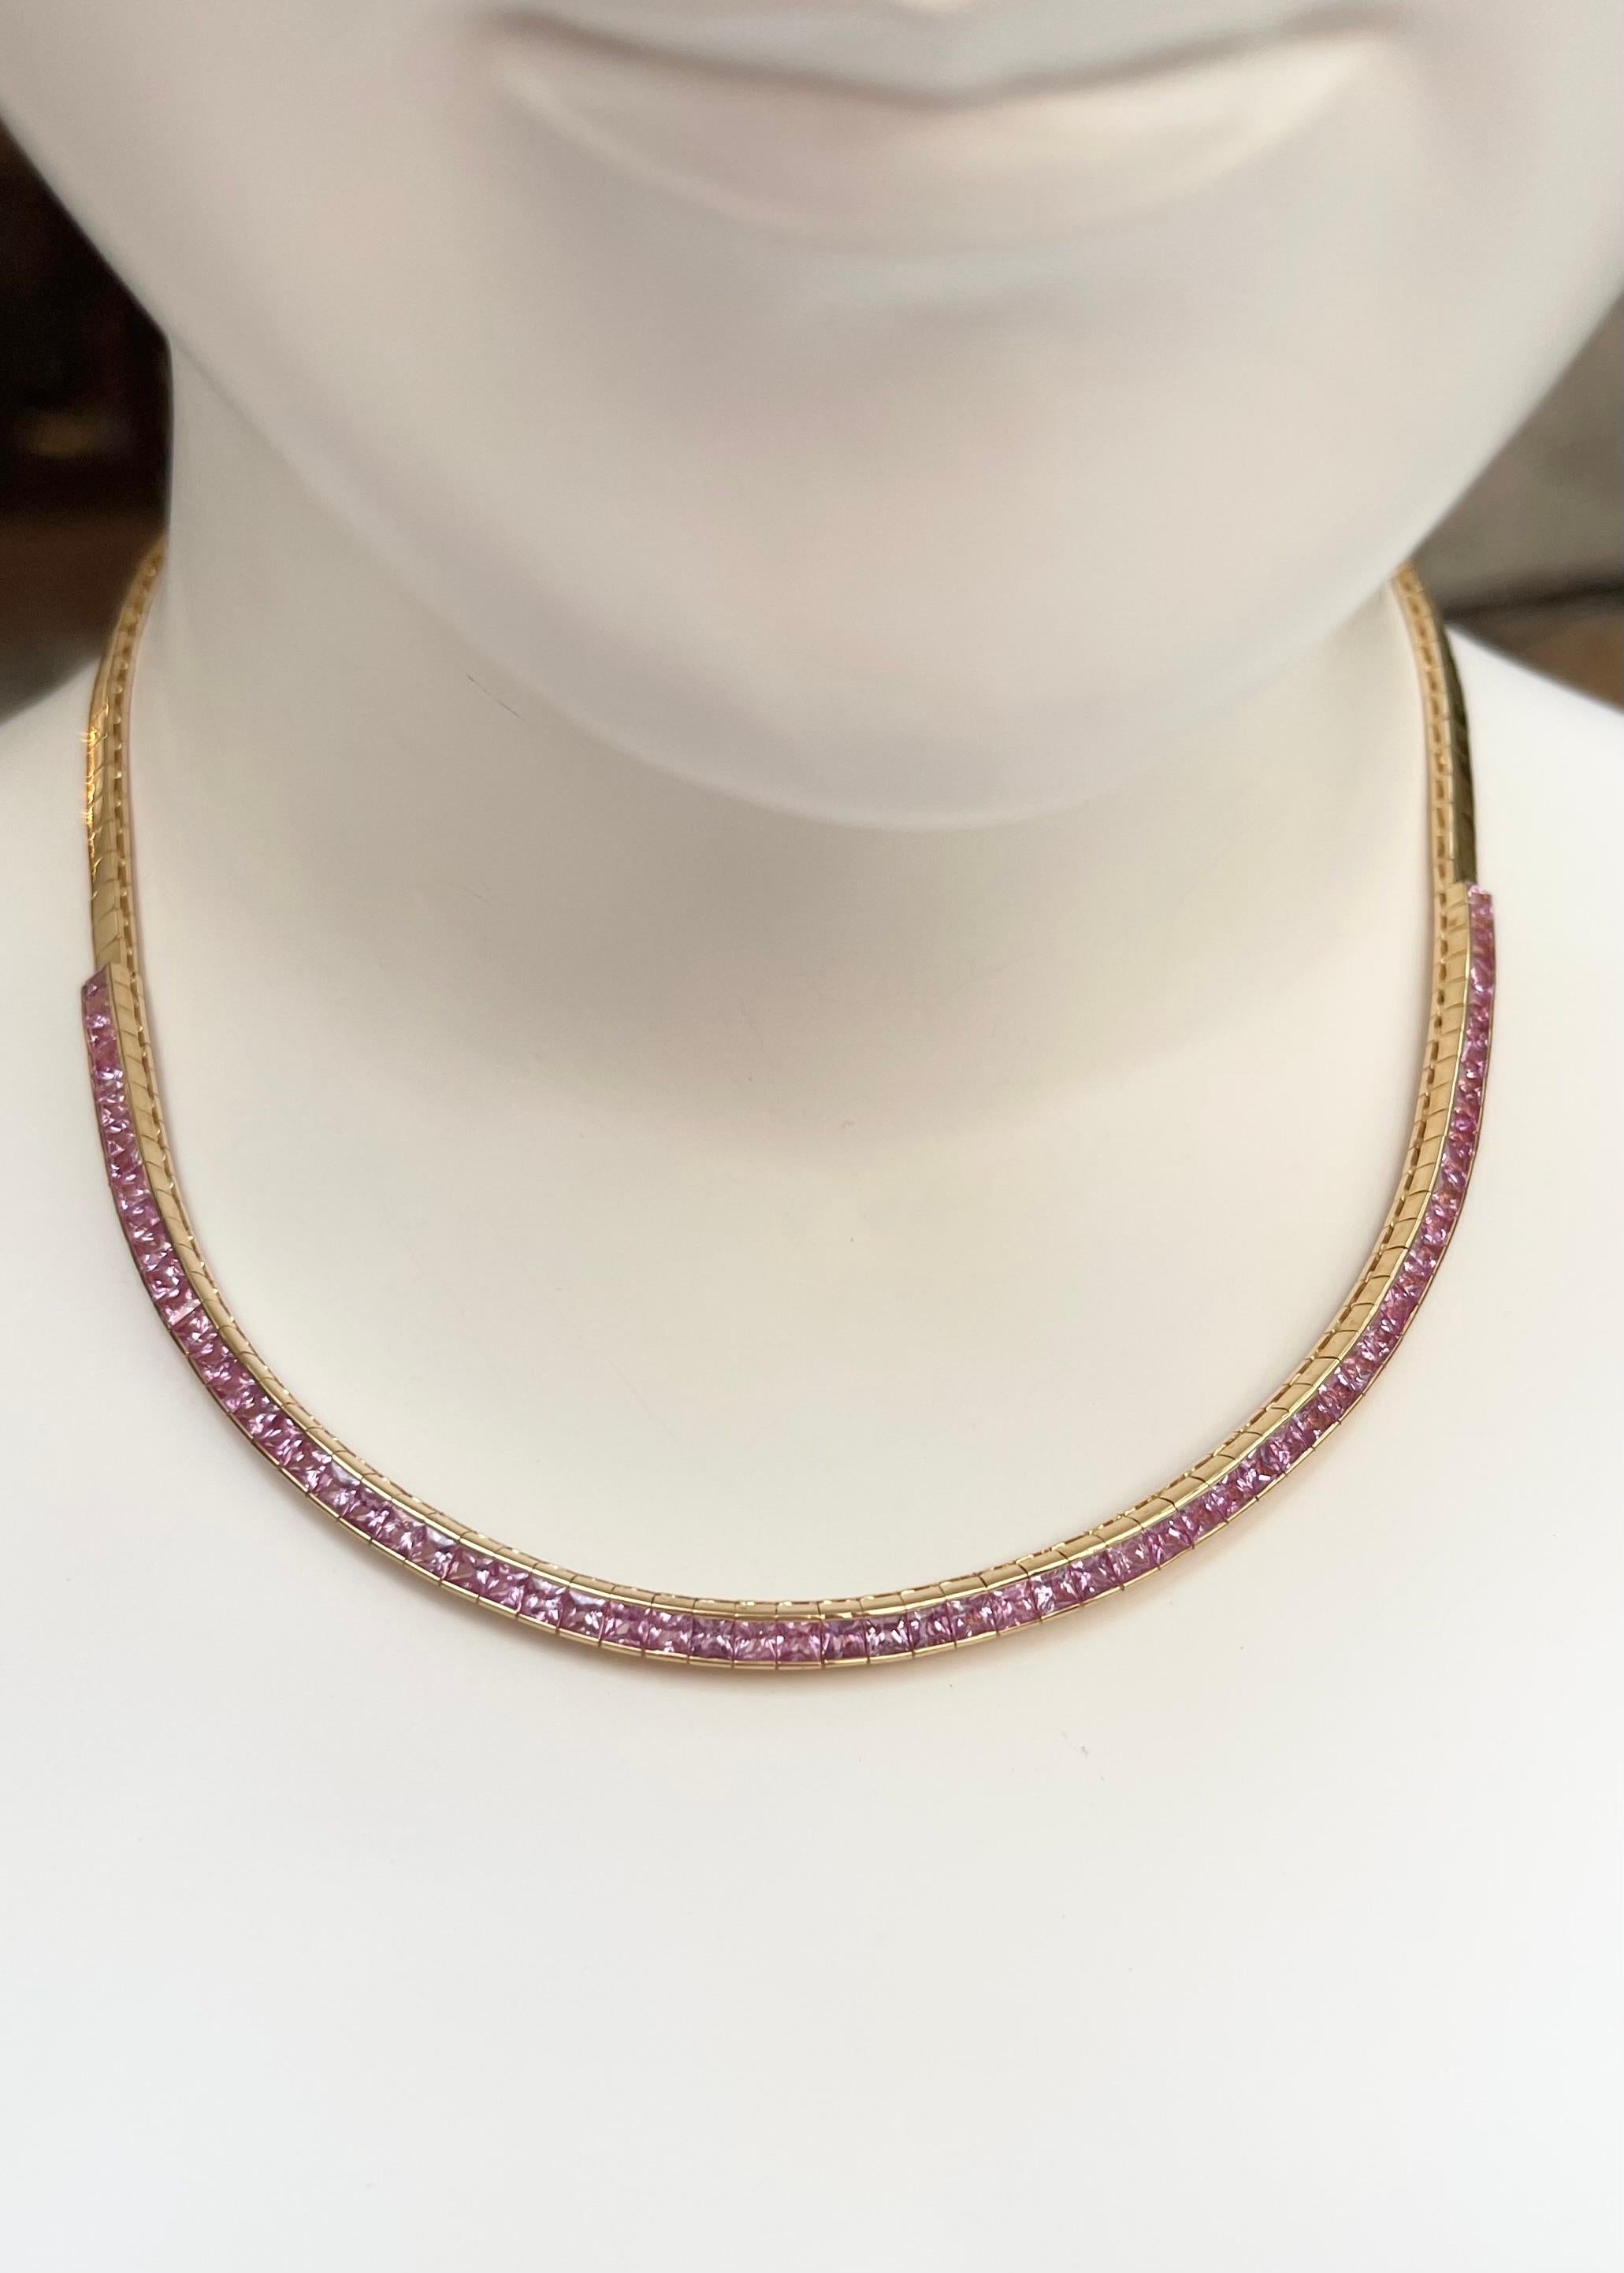 Pink Sapphire 9.09 carats Necklace set in 18K Gold Settings

Width: 0.4 cm 
Length: 40.5 cm
Total Weight: 31.60 grams

